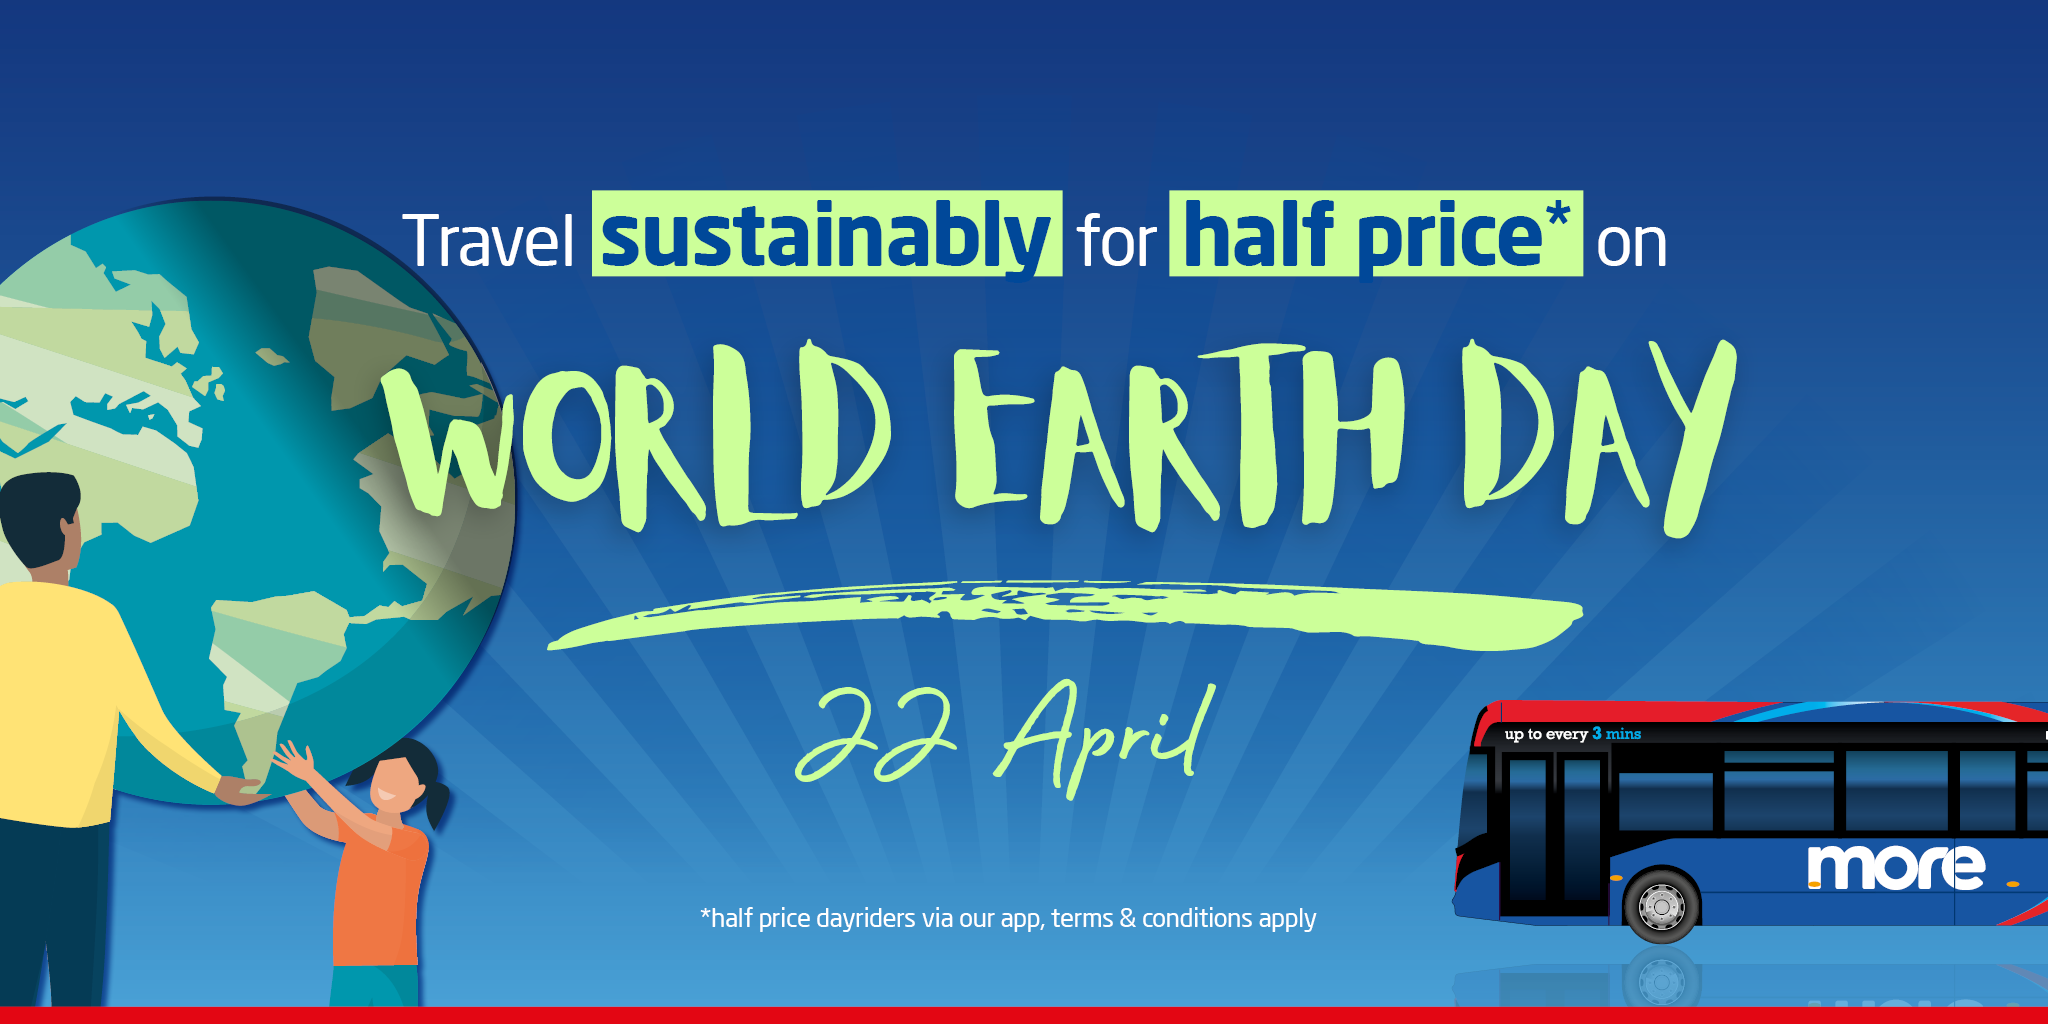 travel sustainably for half price on world earth day - 22 april